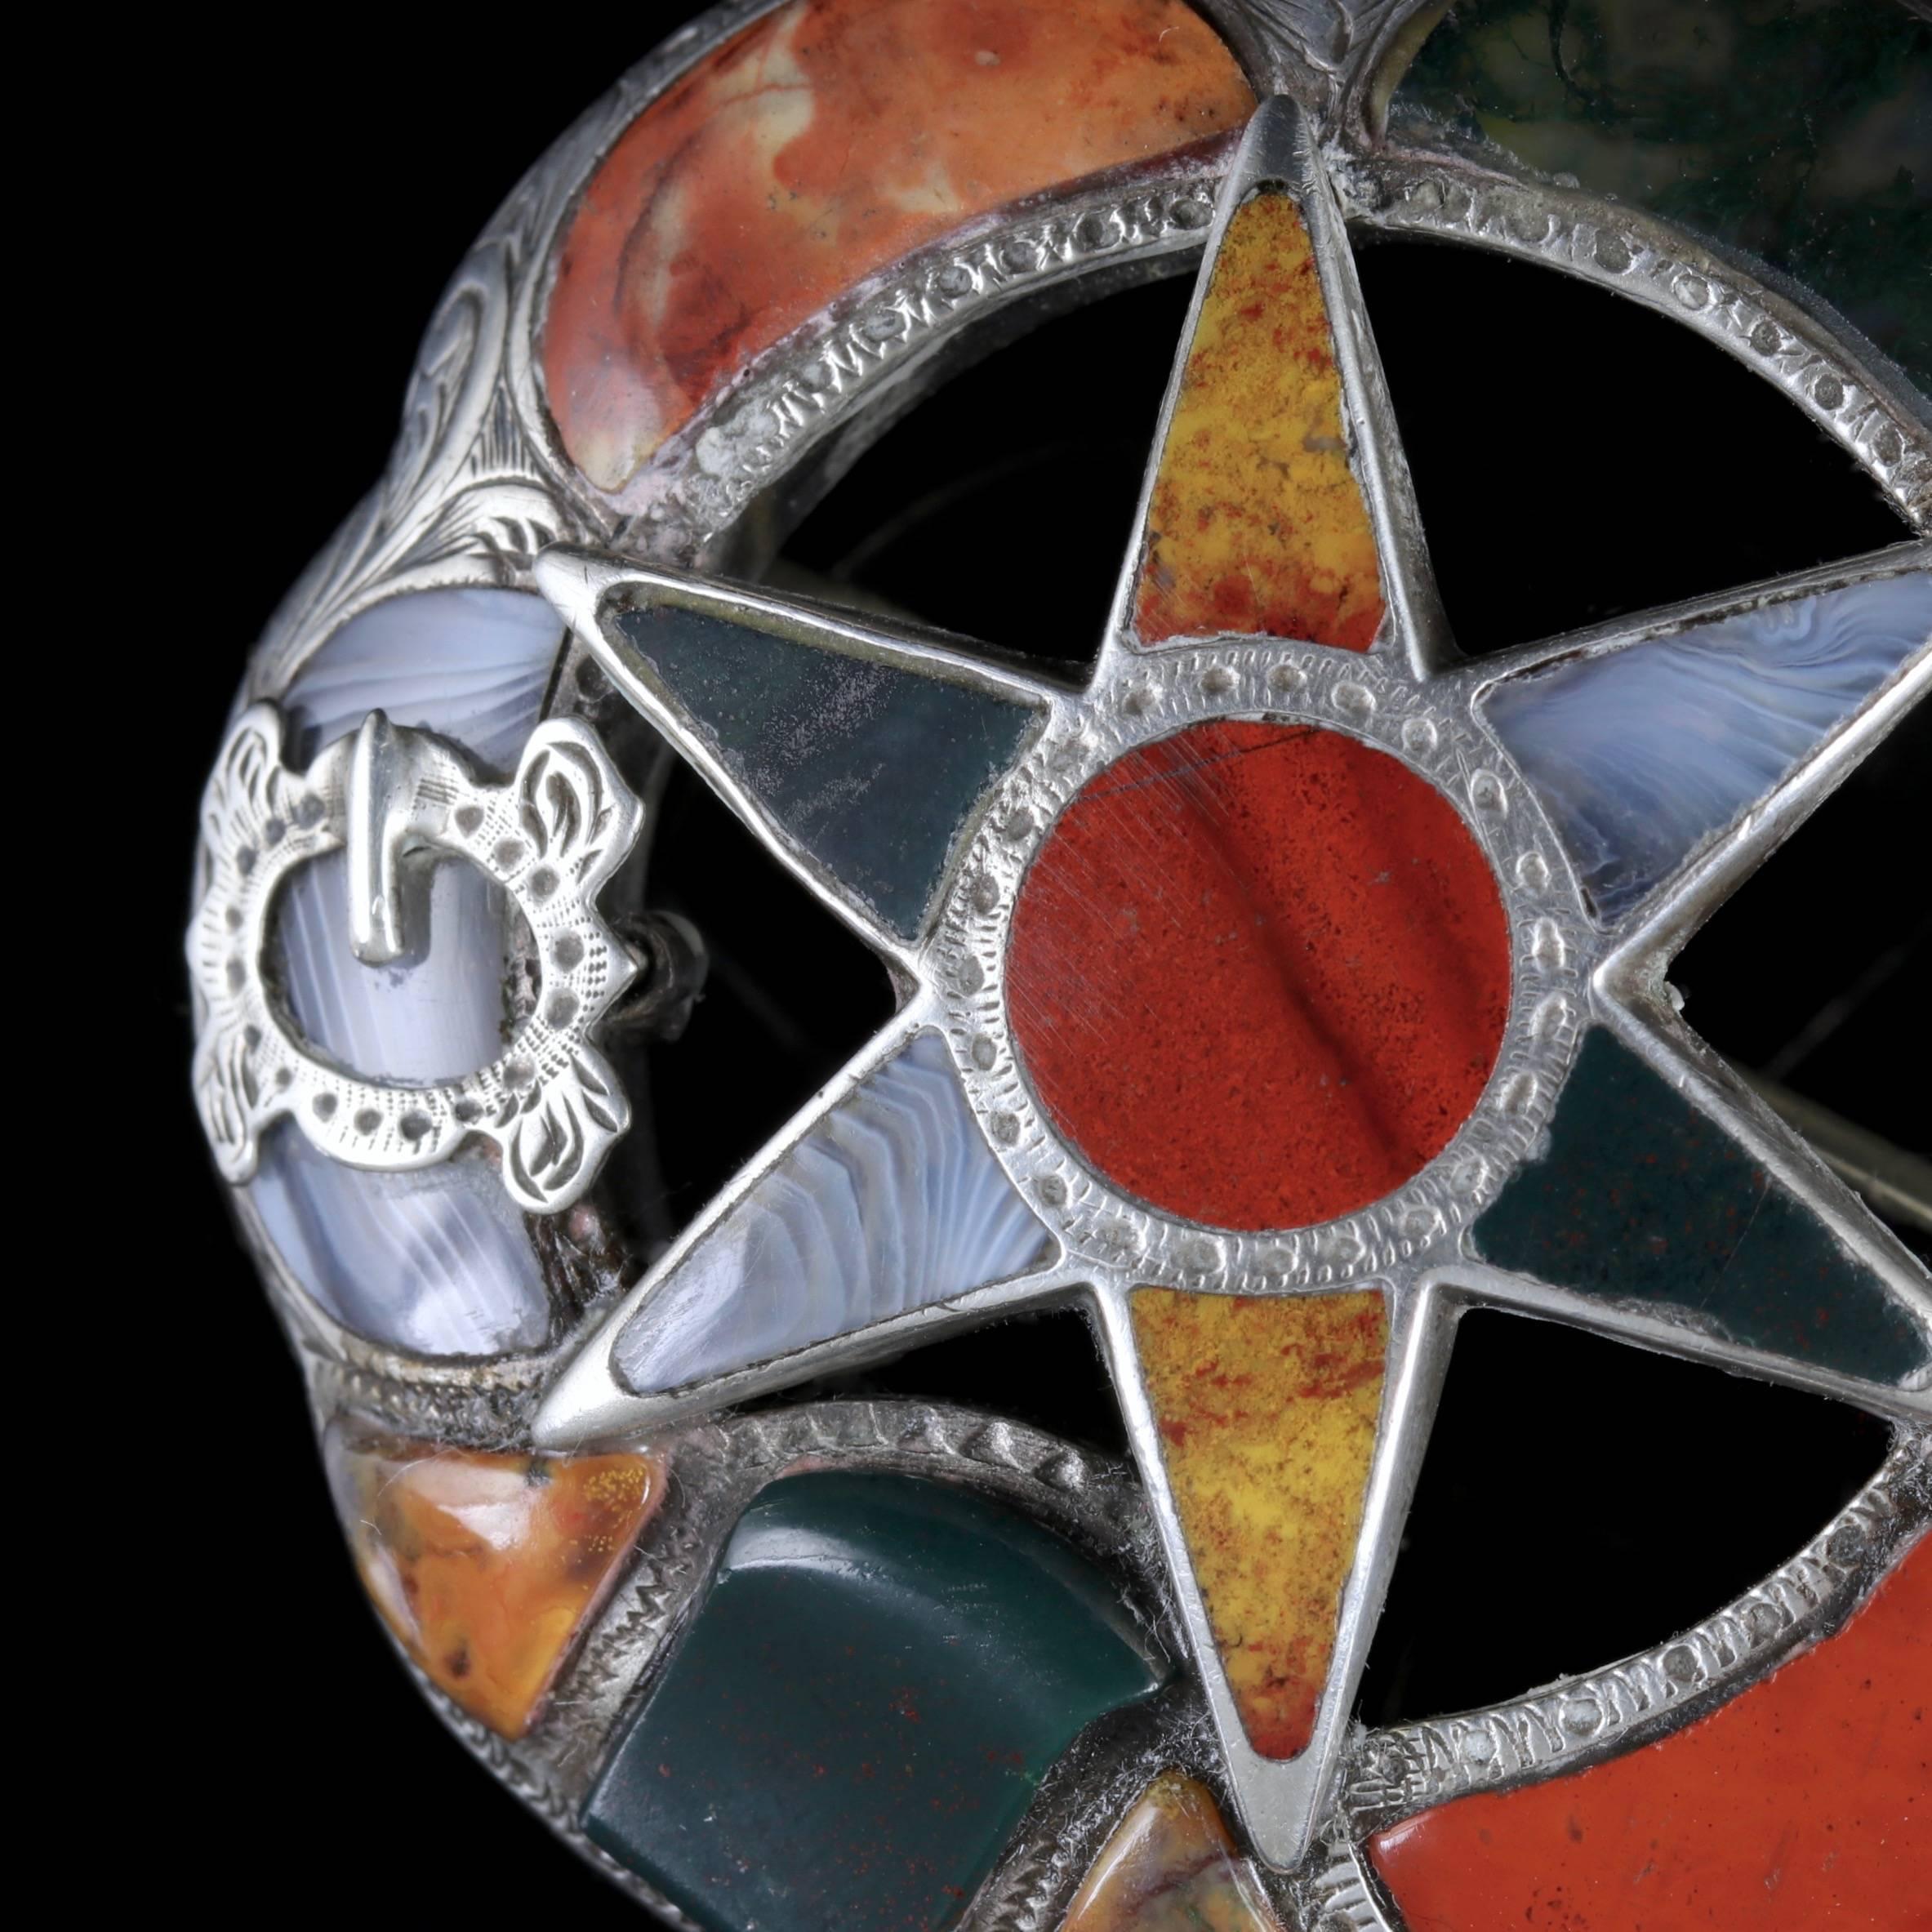 To read more please click continue reading below-

This beautiful antique Scottish Silver Agate brooch is Victorian Circa 1860.

Scottish jewellery was made popular by Queen Victoria as it became a souvenir of her frequent trips to Scotland and her